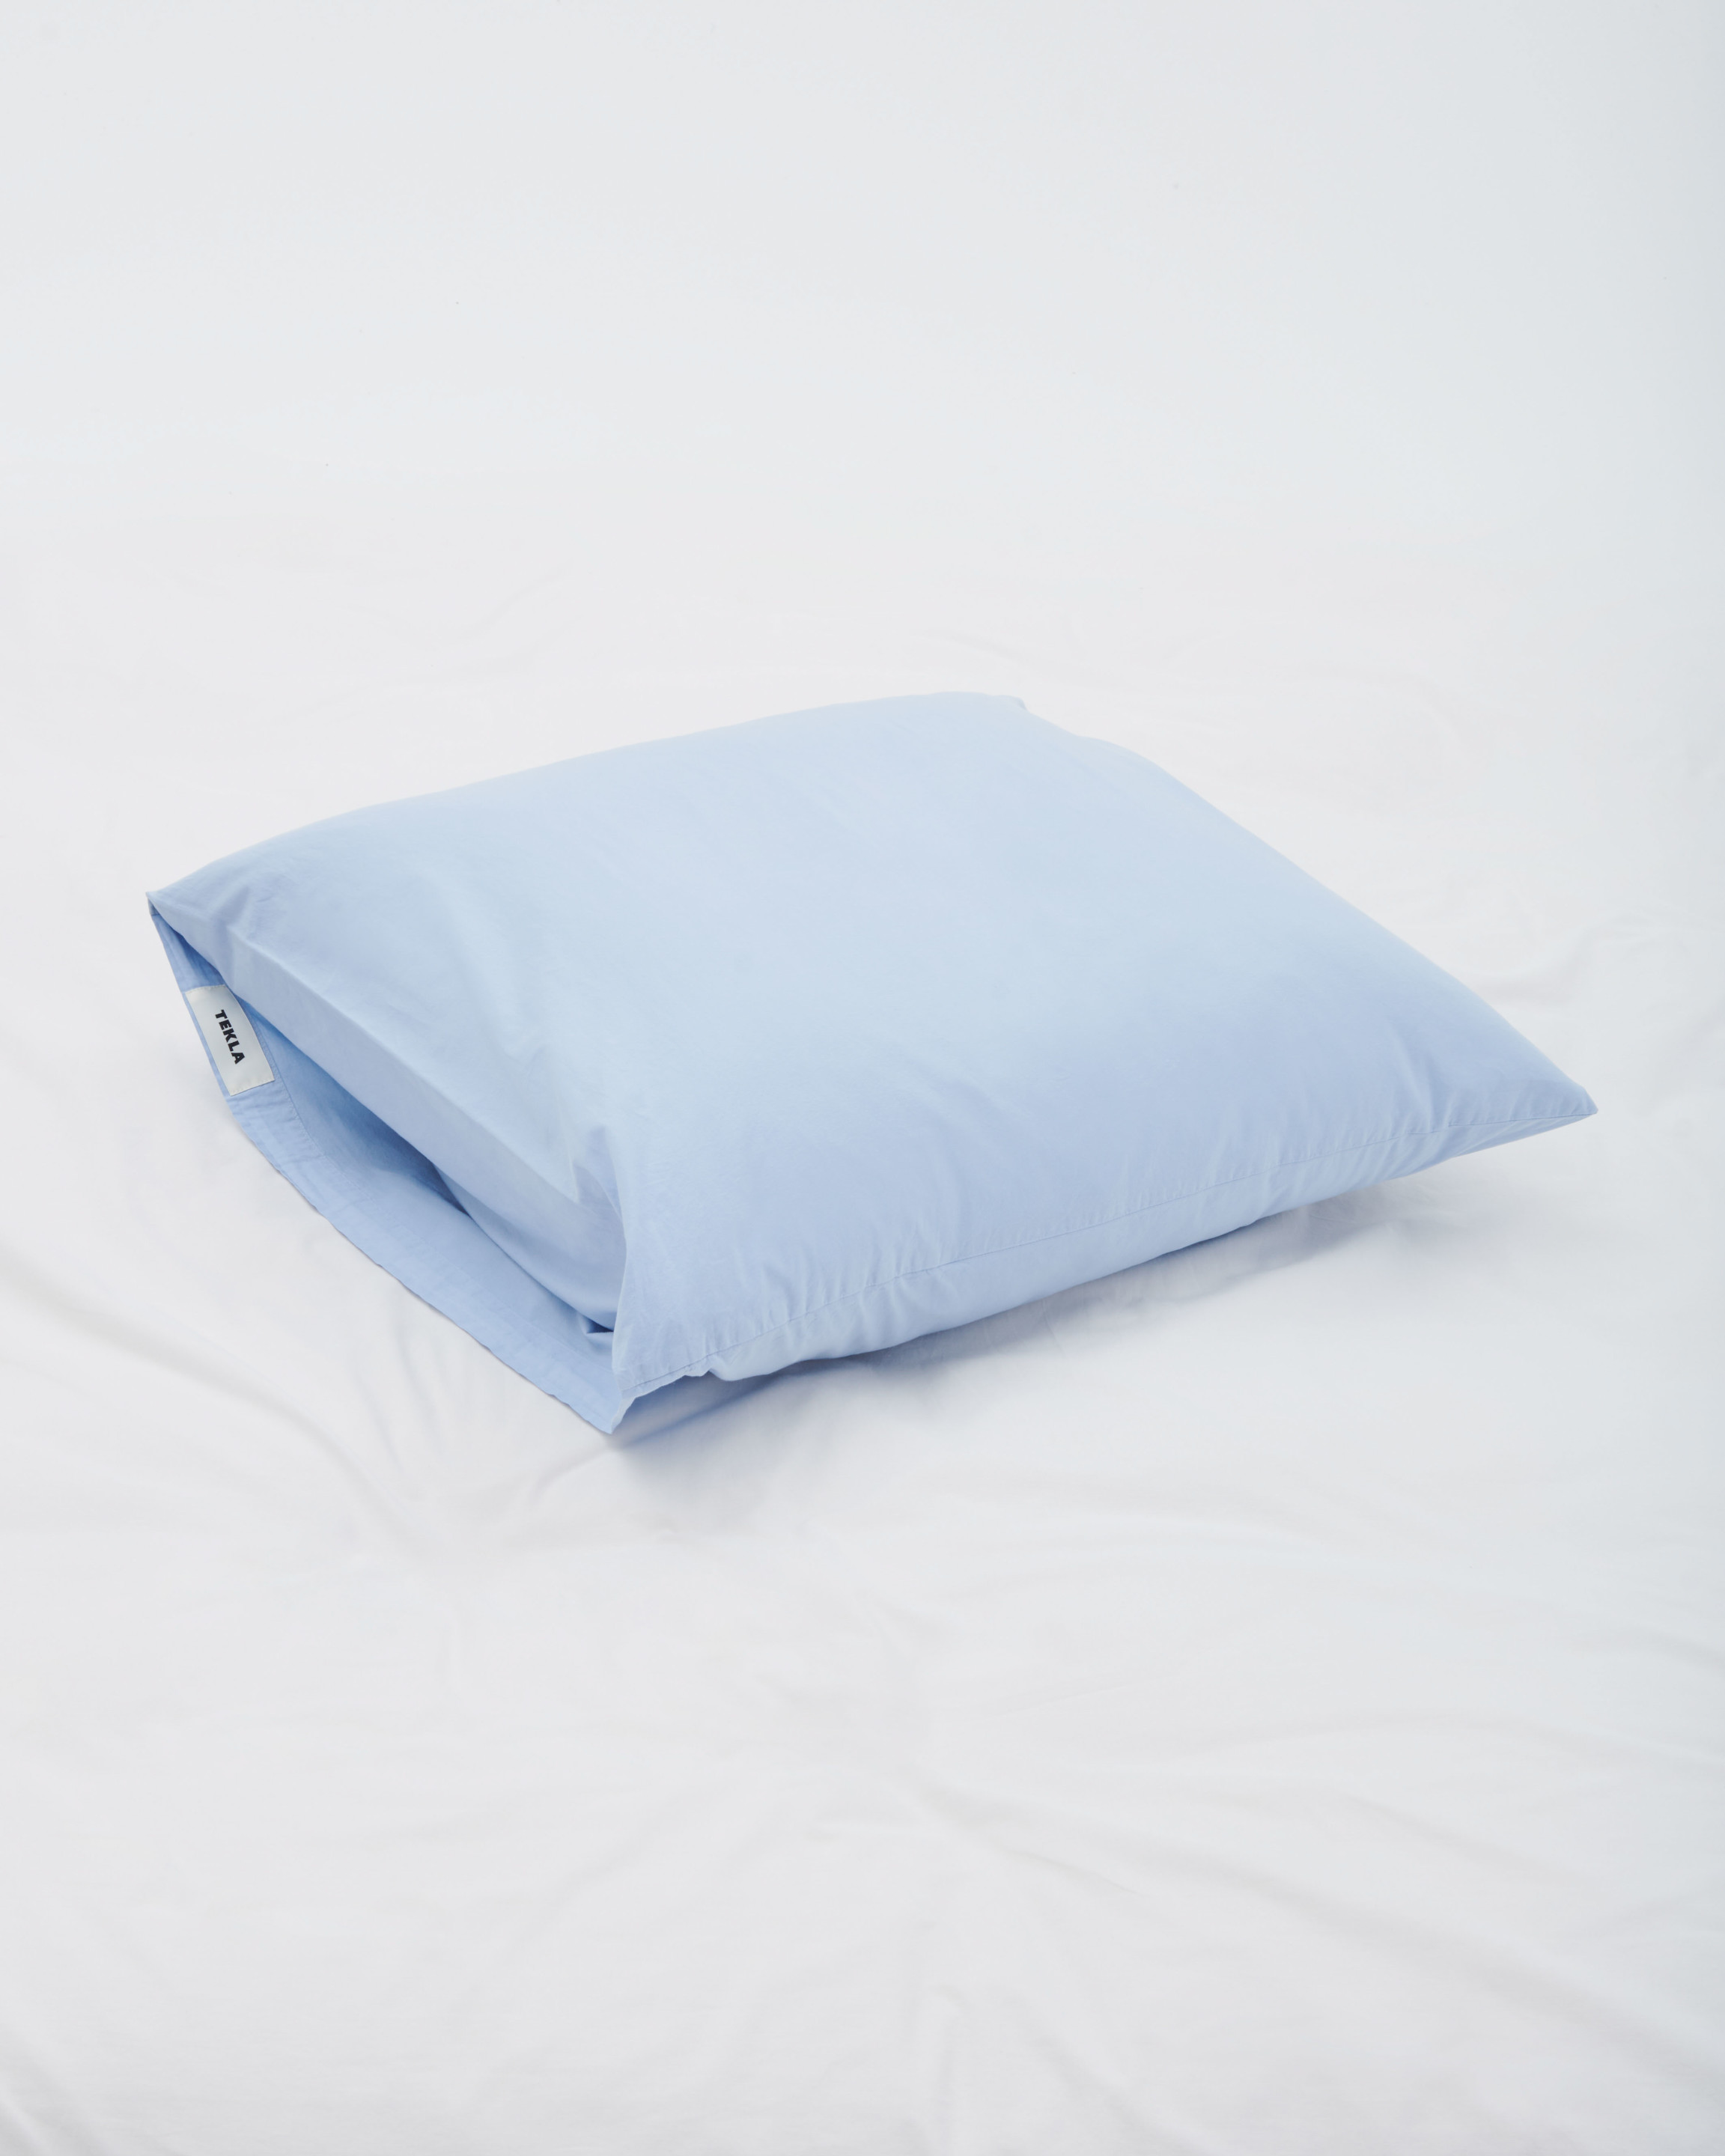 Percale - Pillow Sham - Morning Blue